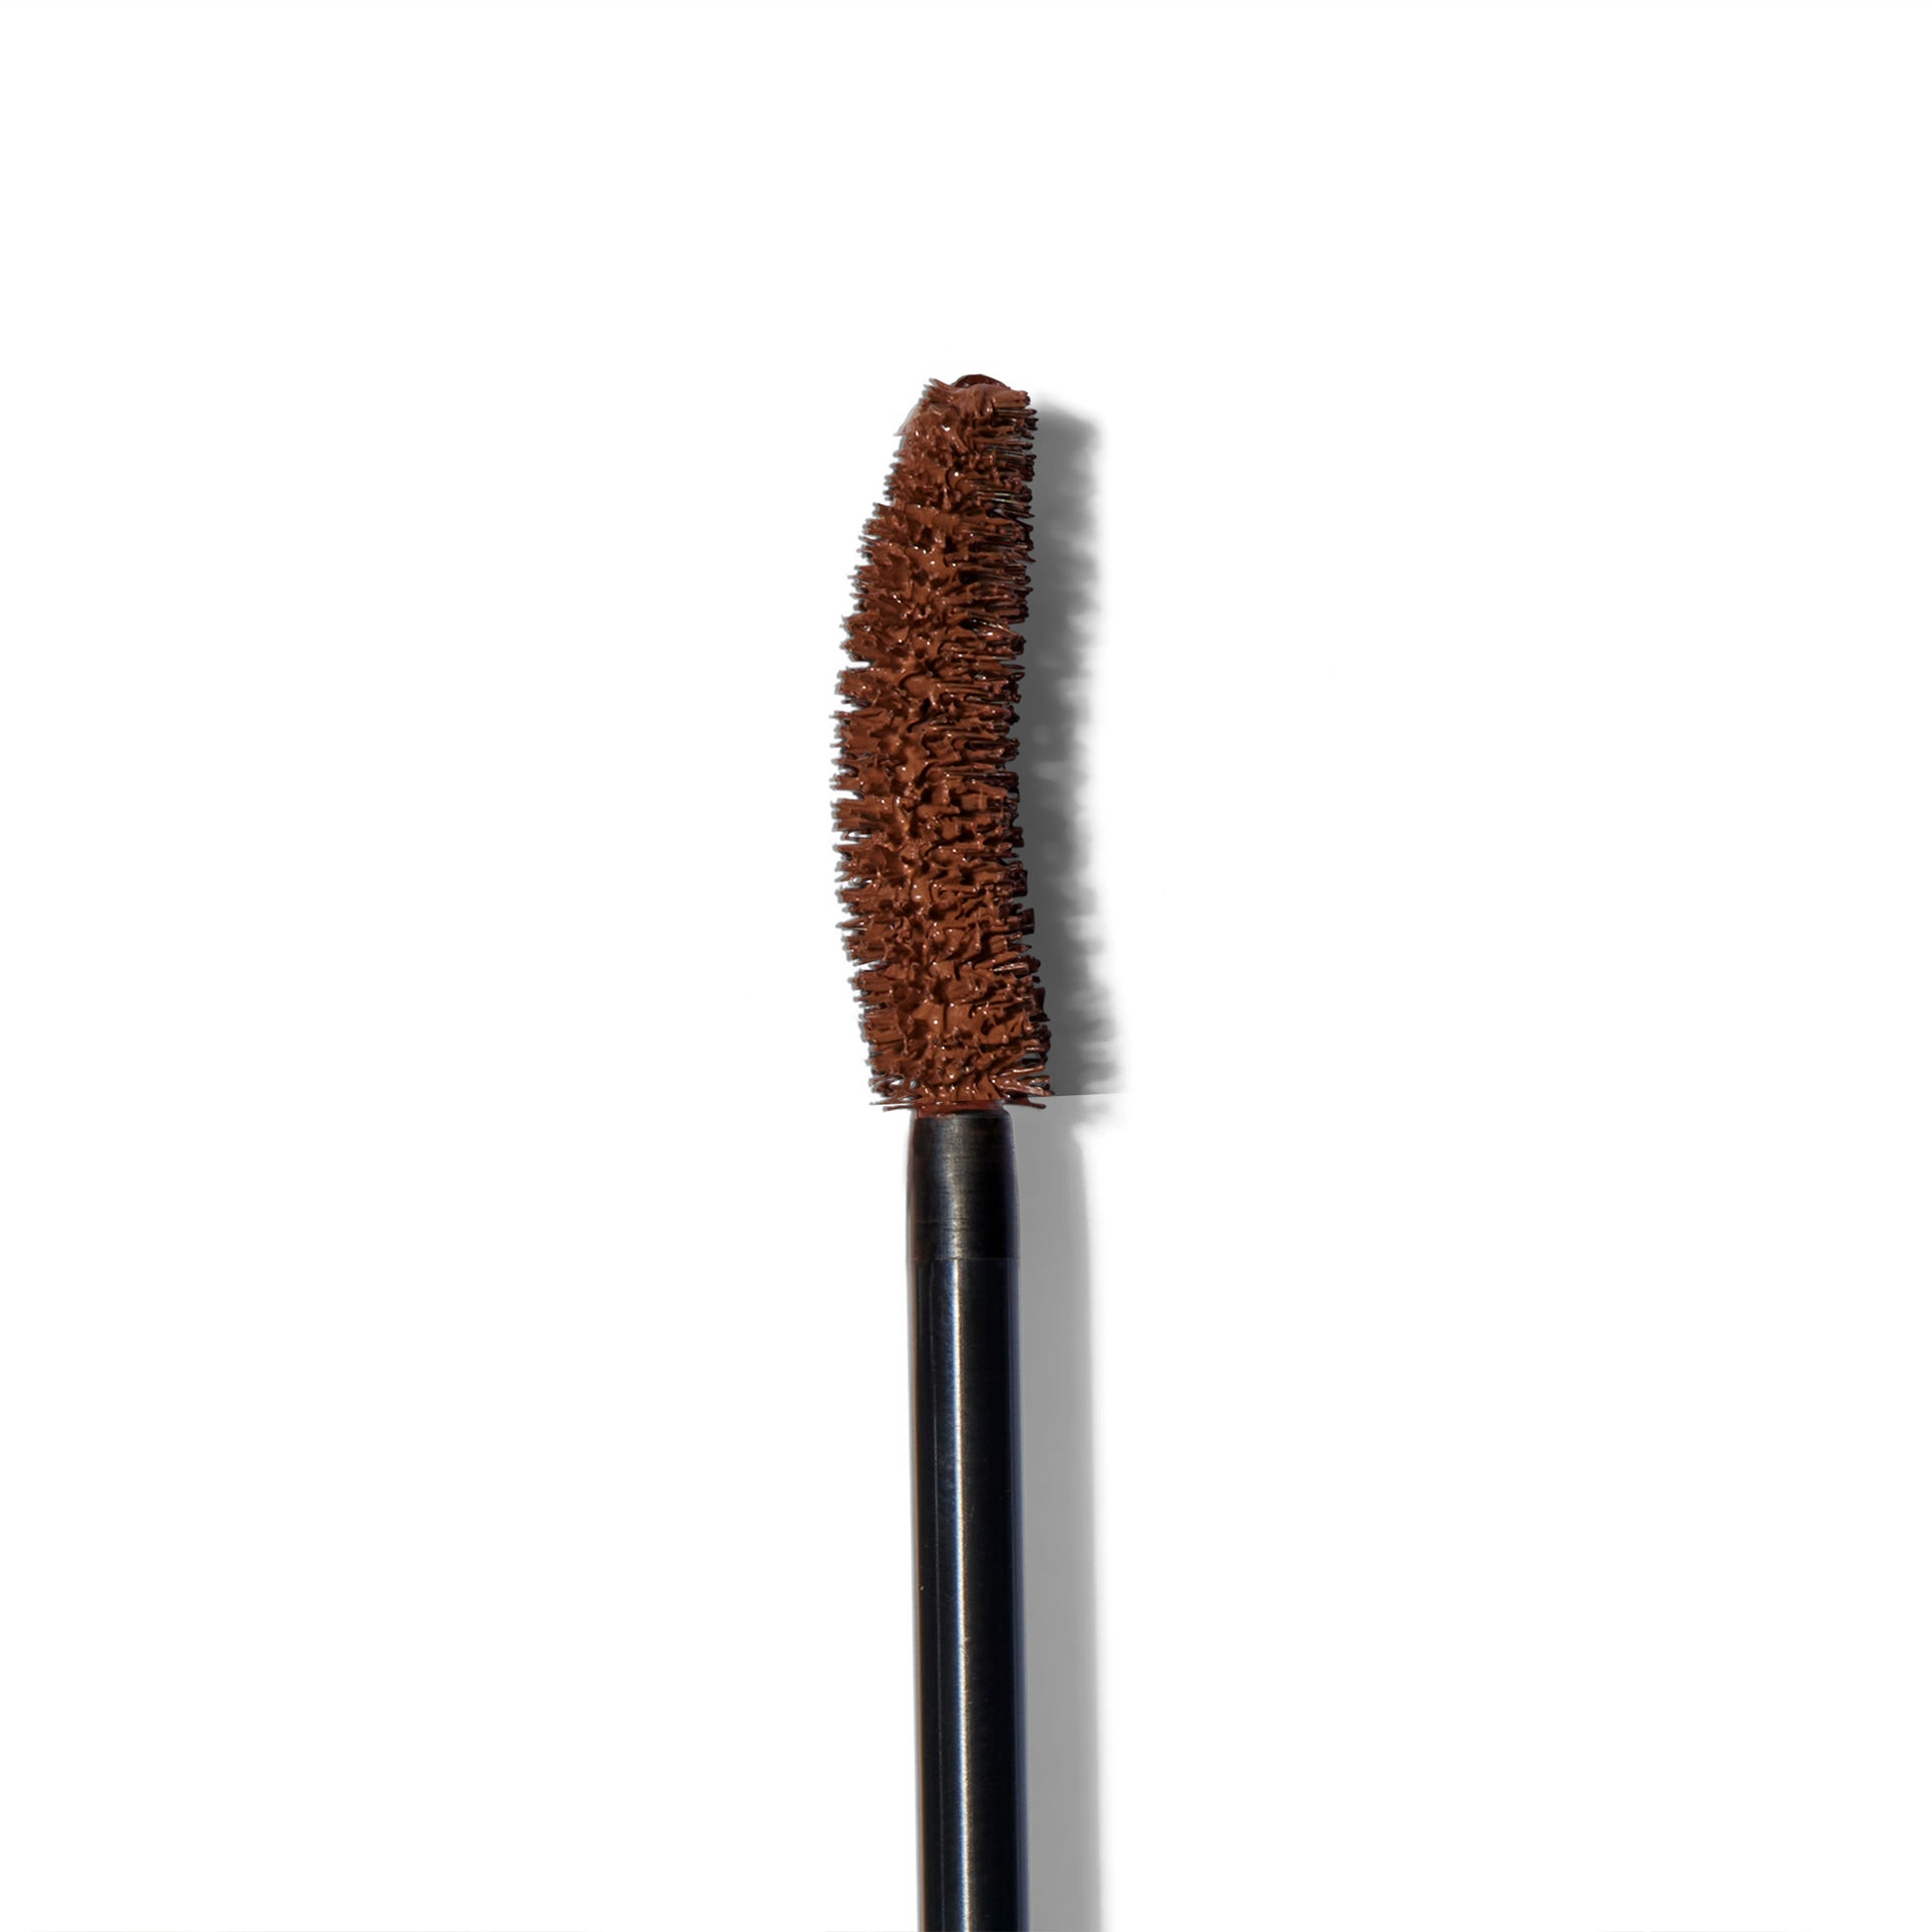 Close up of the Redhead Revolution Gingerlash Mascara wand in Genuine Ginger.